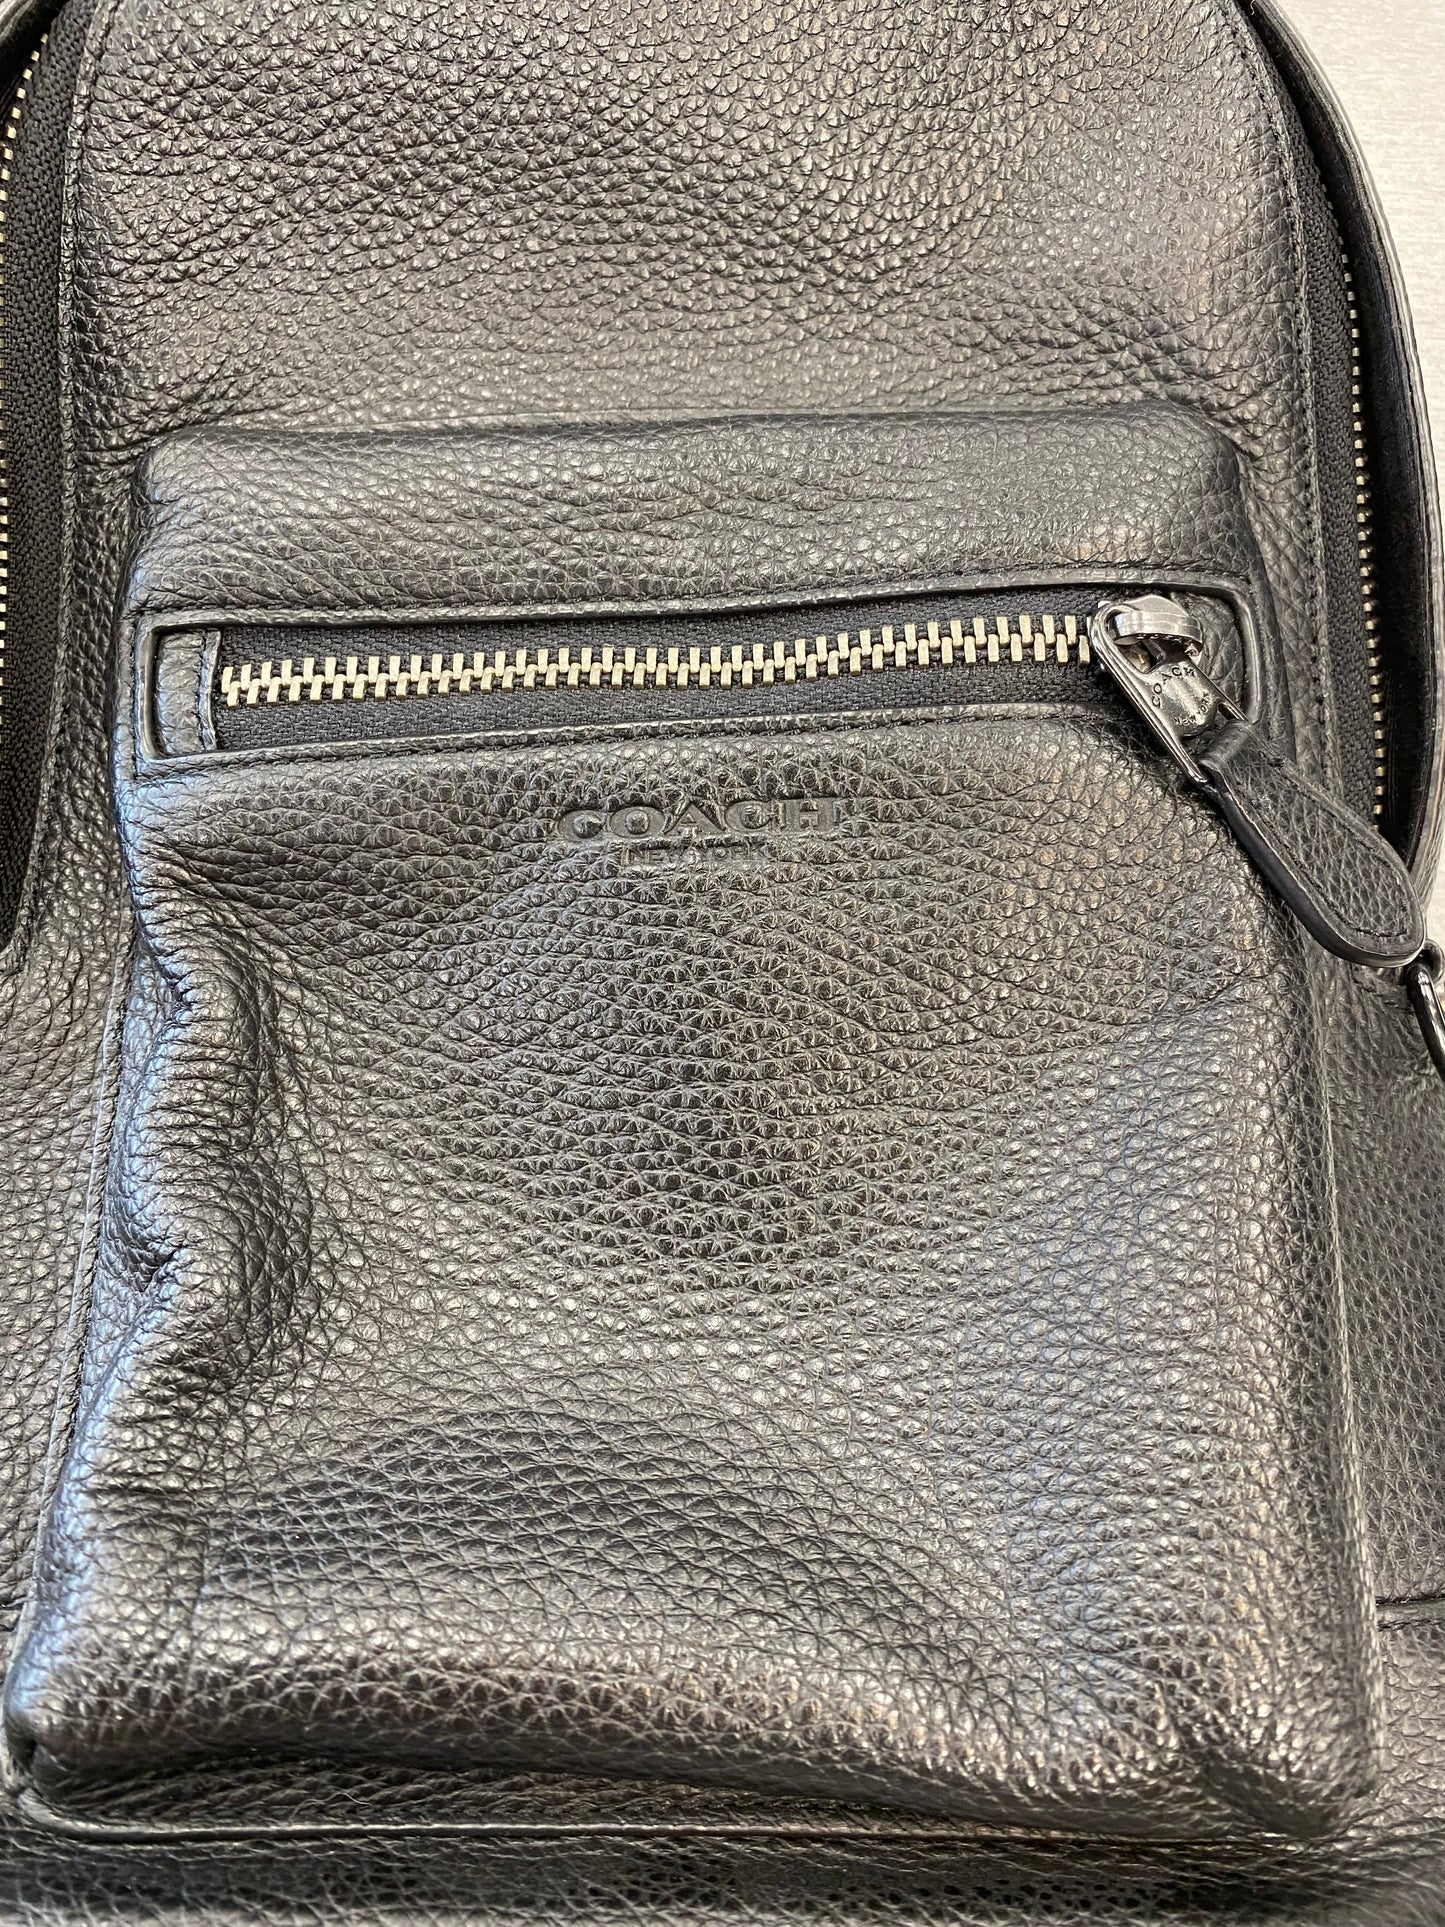 Backpack Designer Coach, Size Small